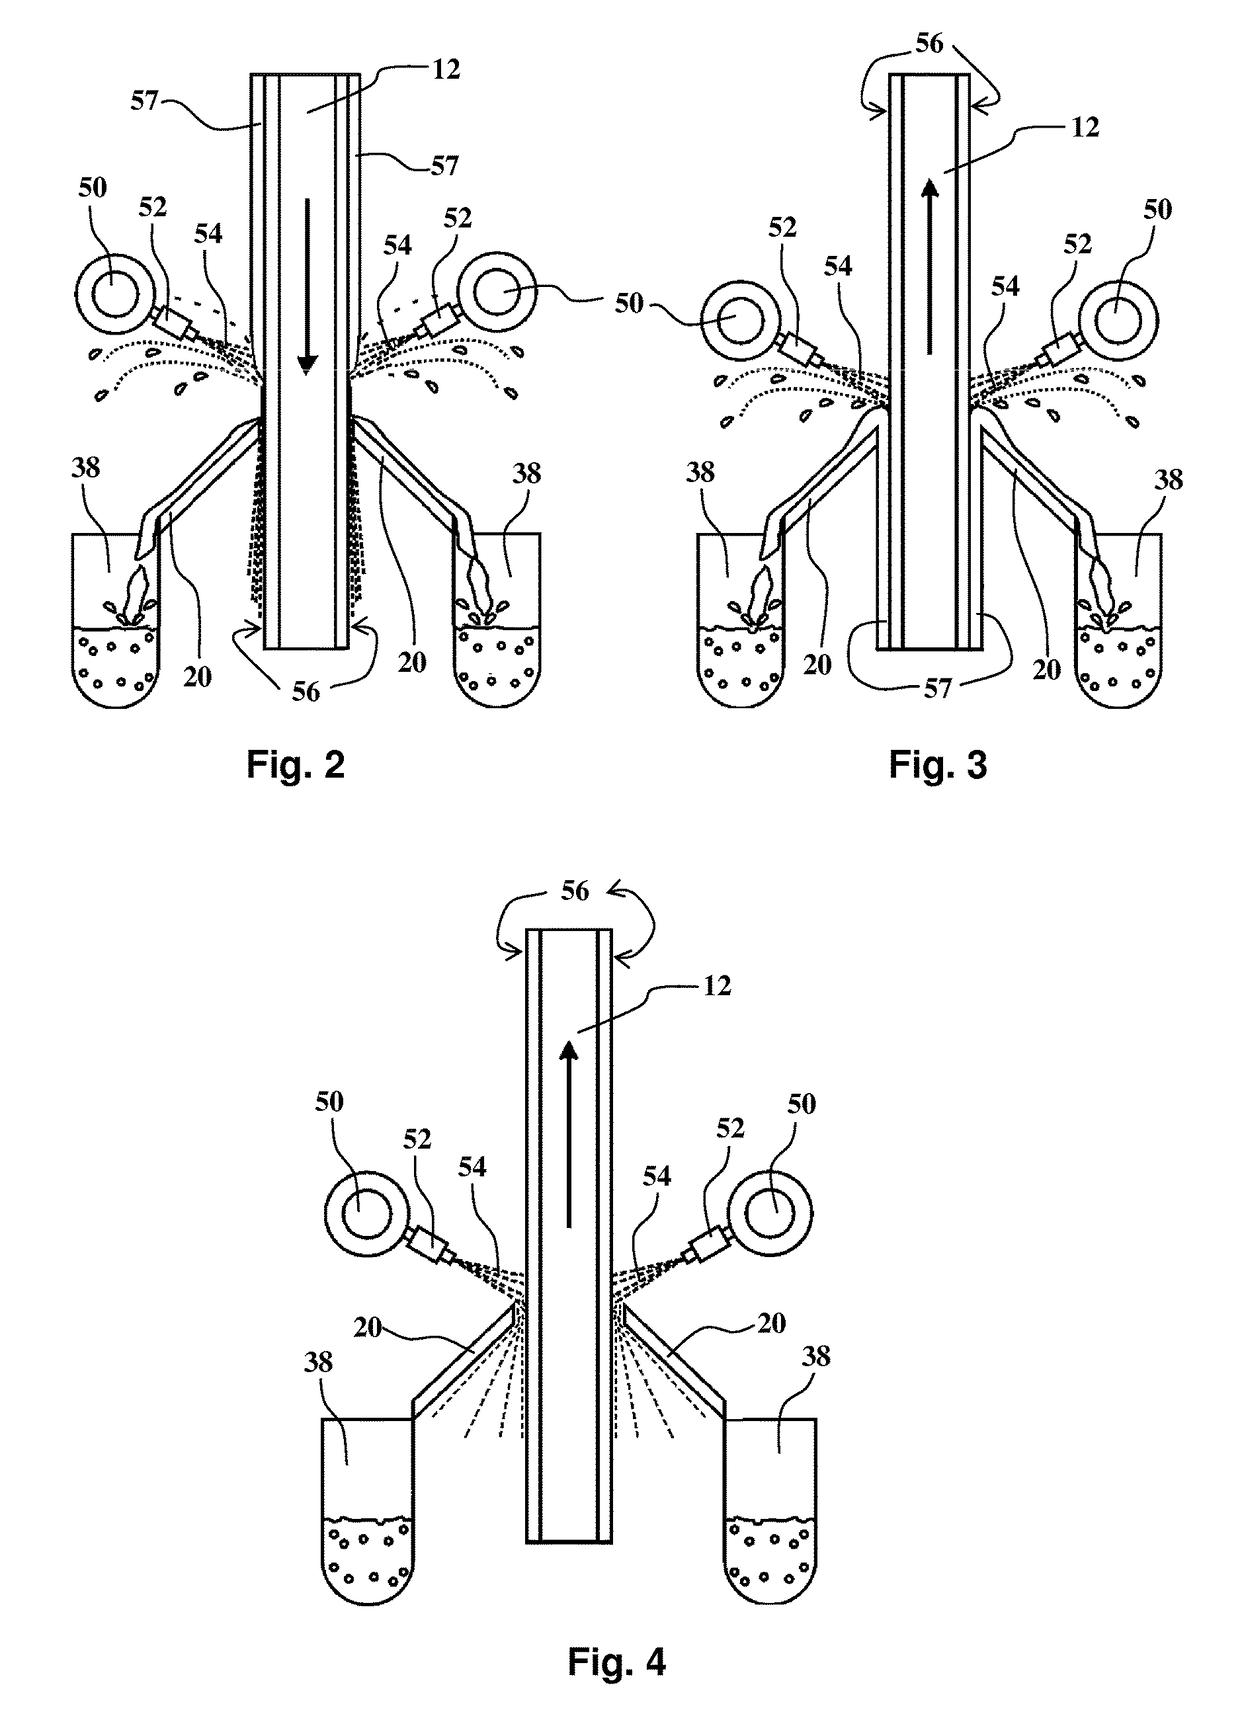 Method for removing the precoat layer of a rotary filter